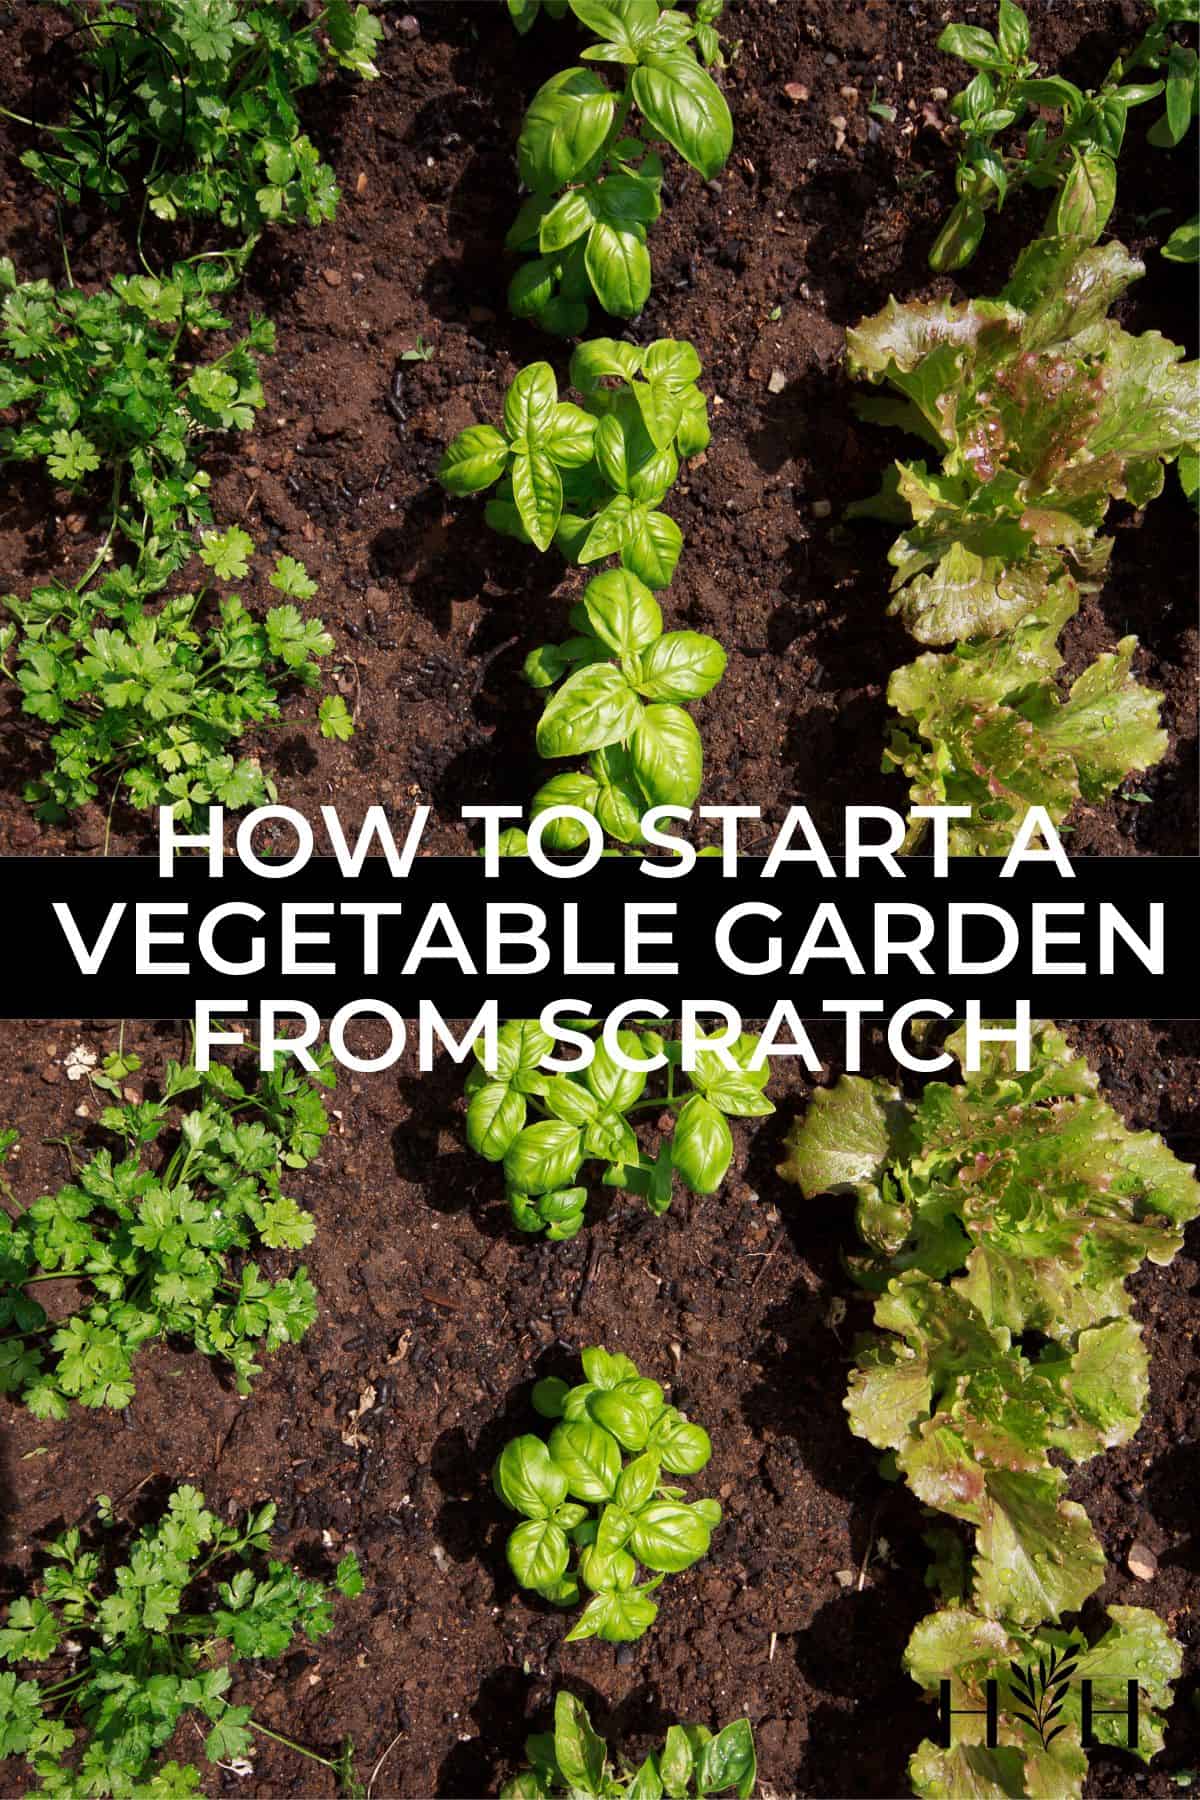 How to start a vegetable garden from scratch via @home4theharvest